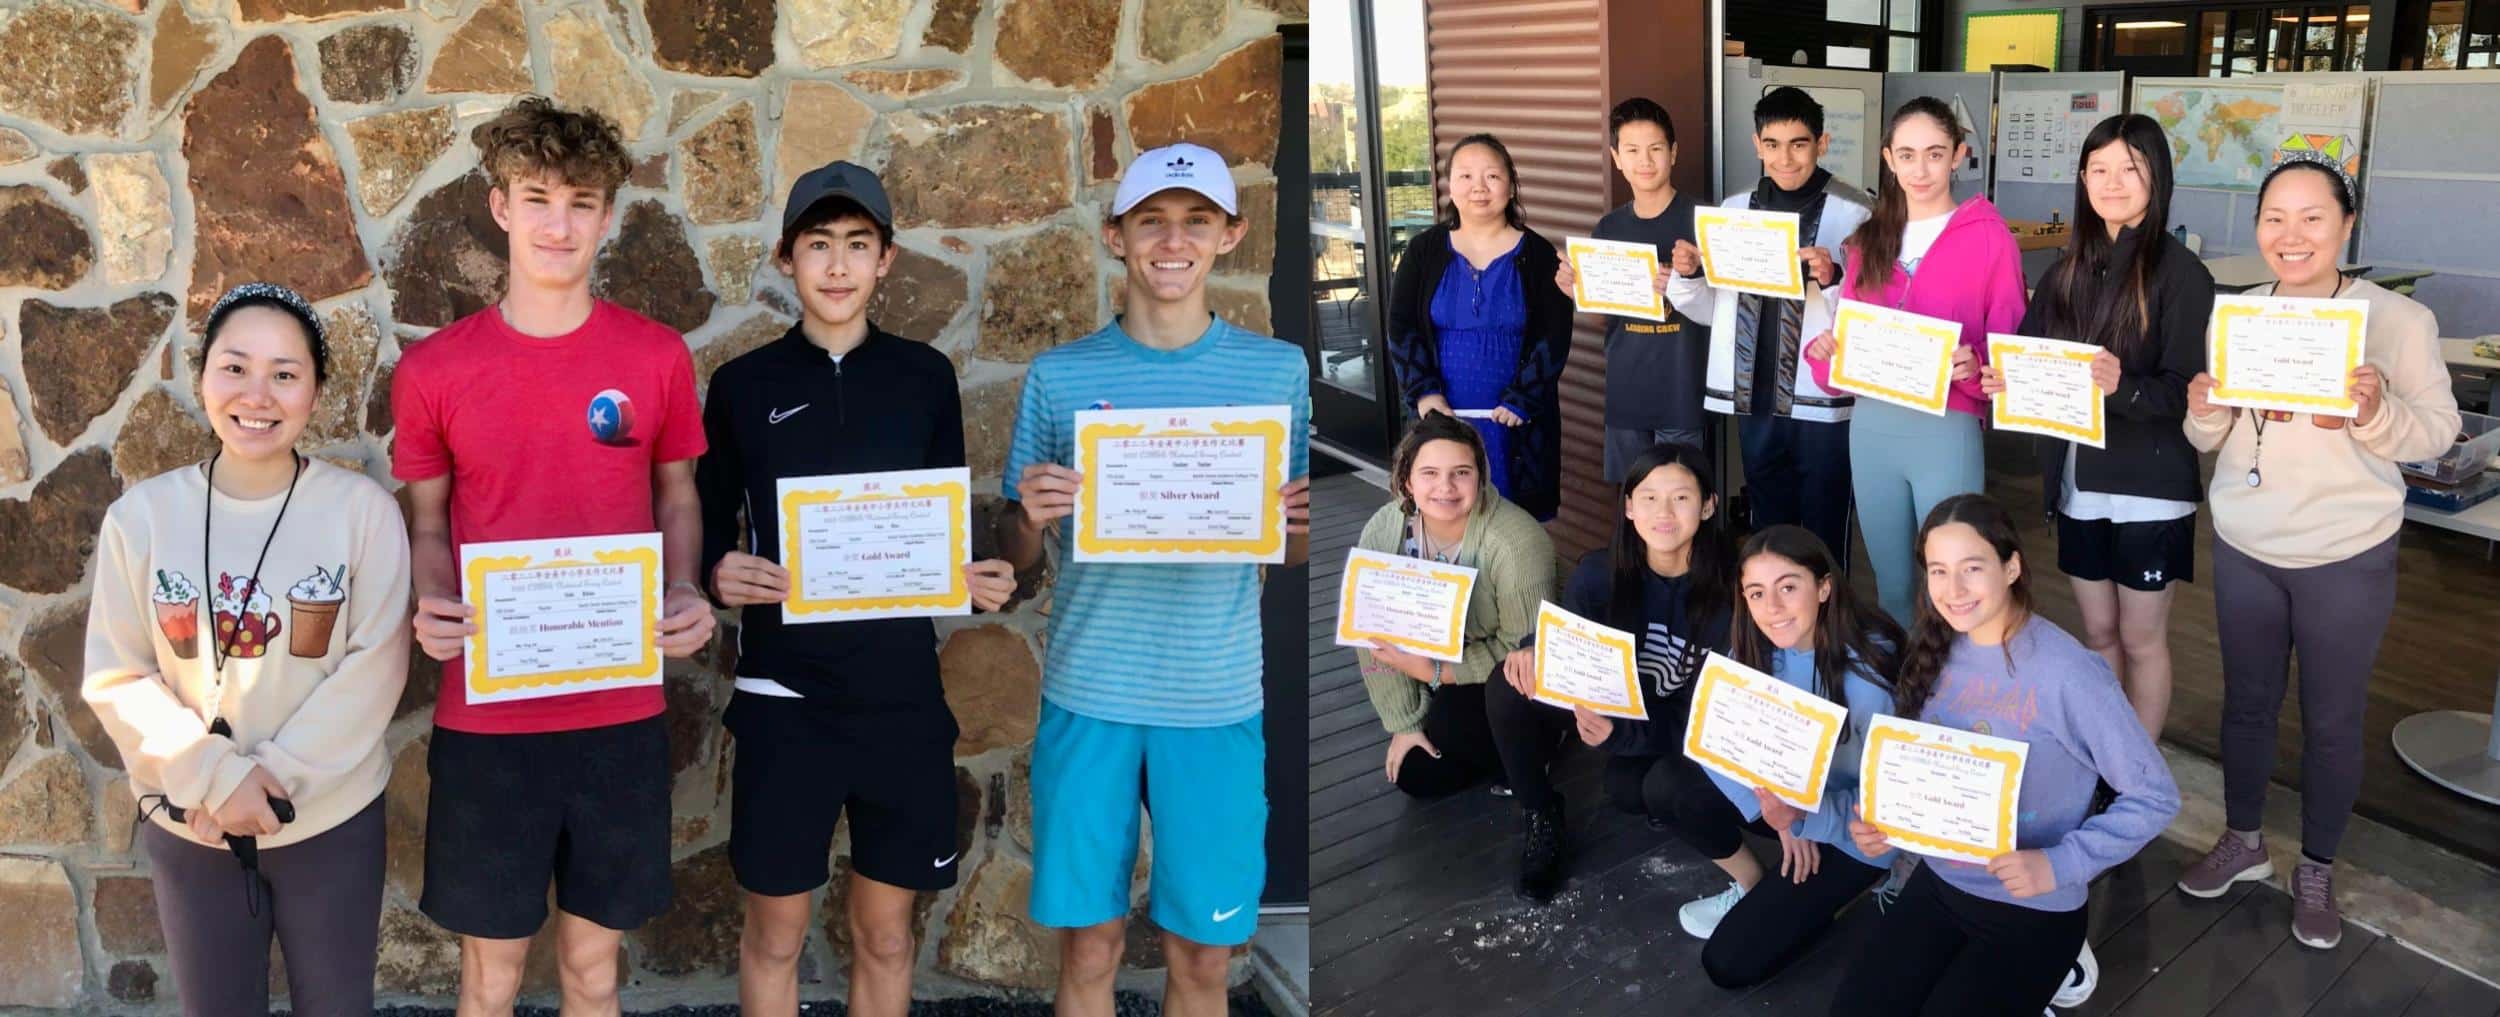 Our students excelled in the National CLASS Chinese Essay Contest